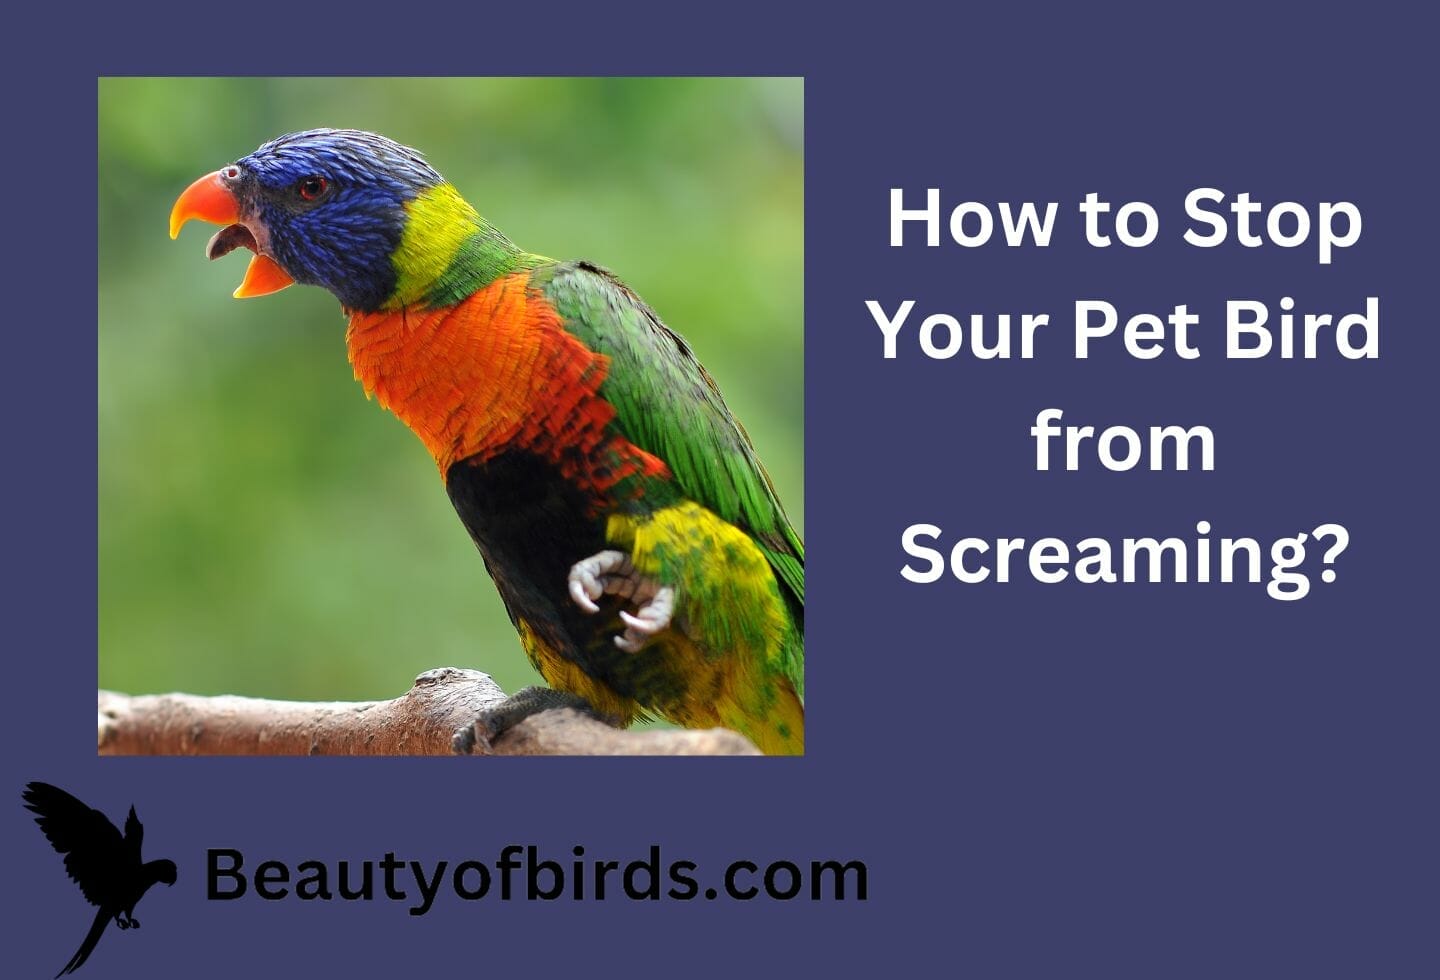 How to Stop Your Pet Bird from Screaming